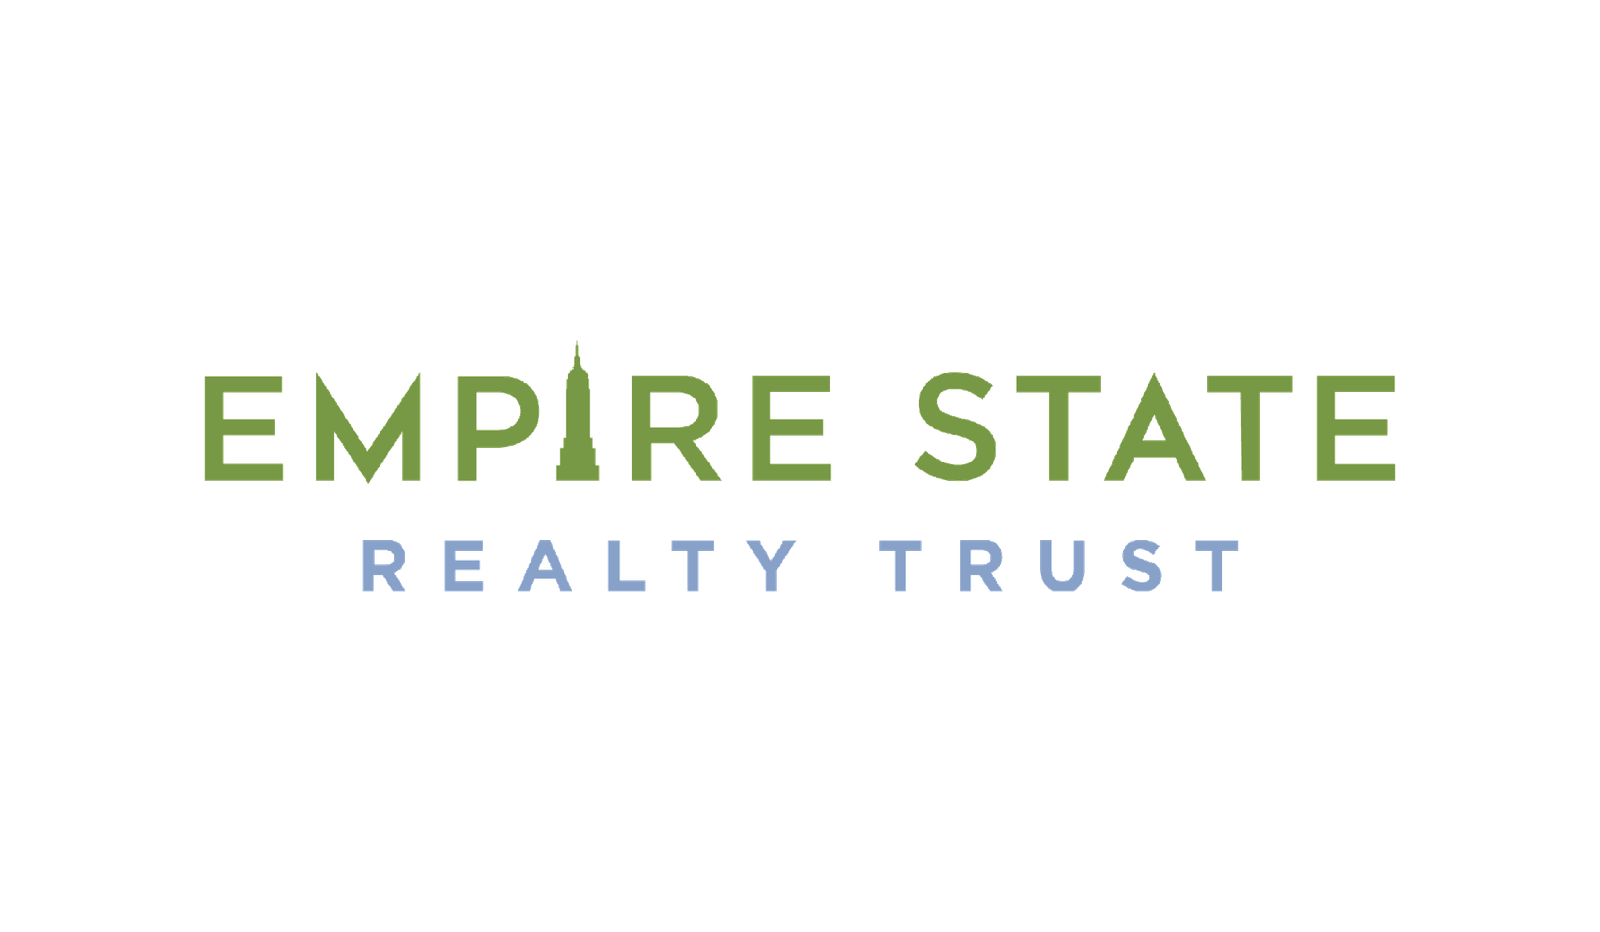 Empire State Realty Trust logo featured